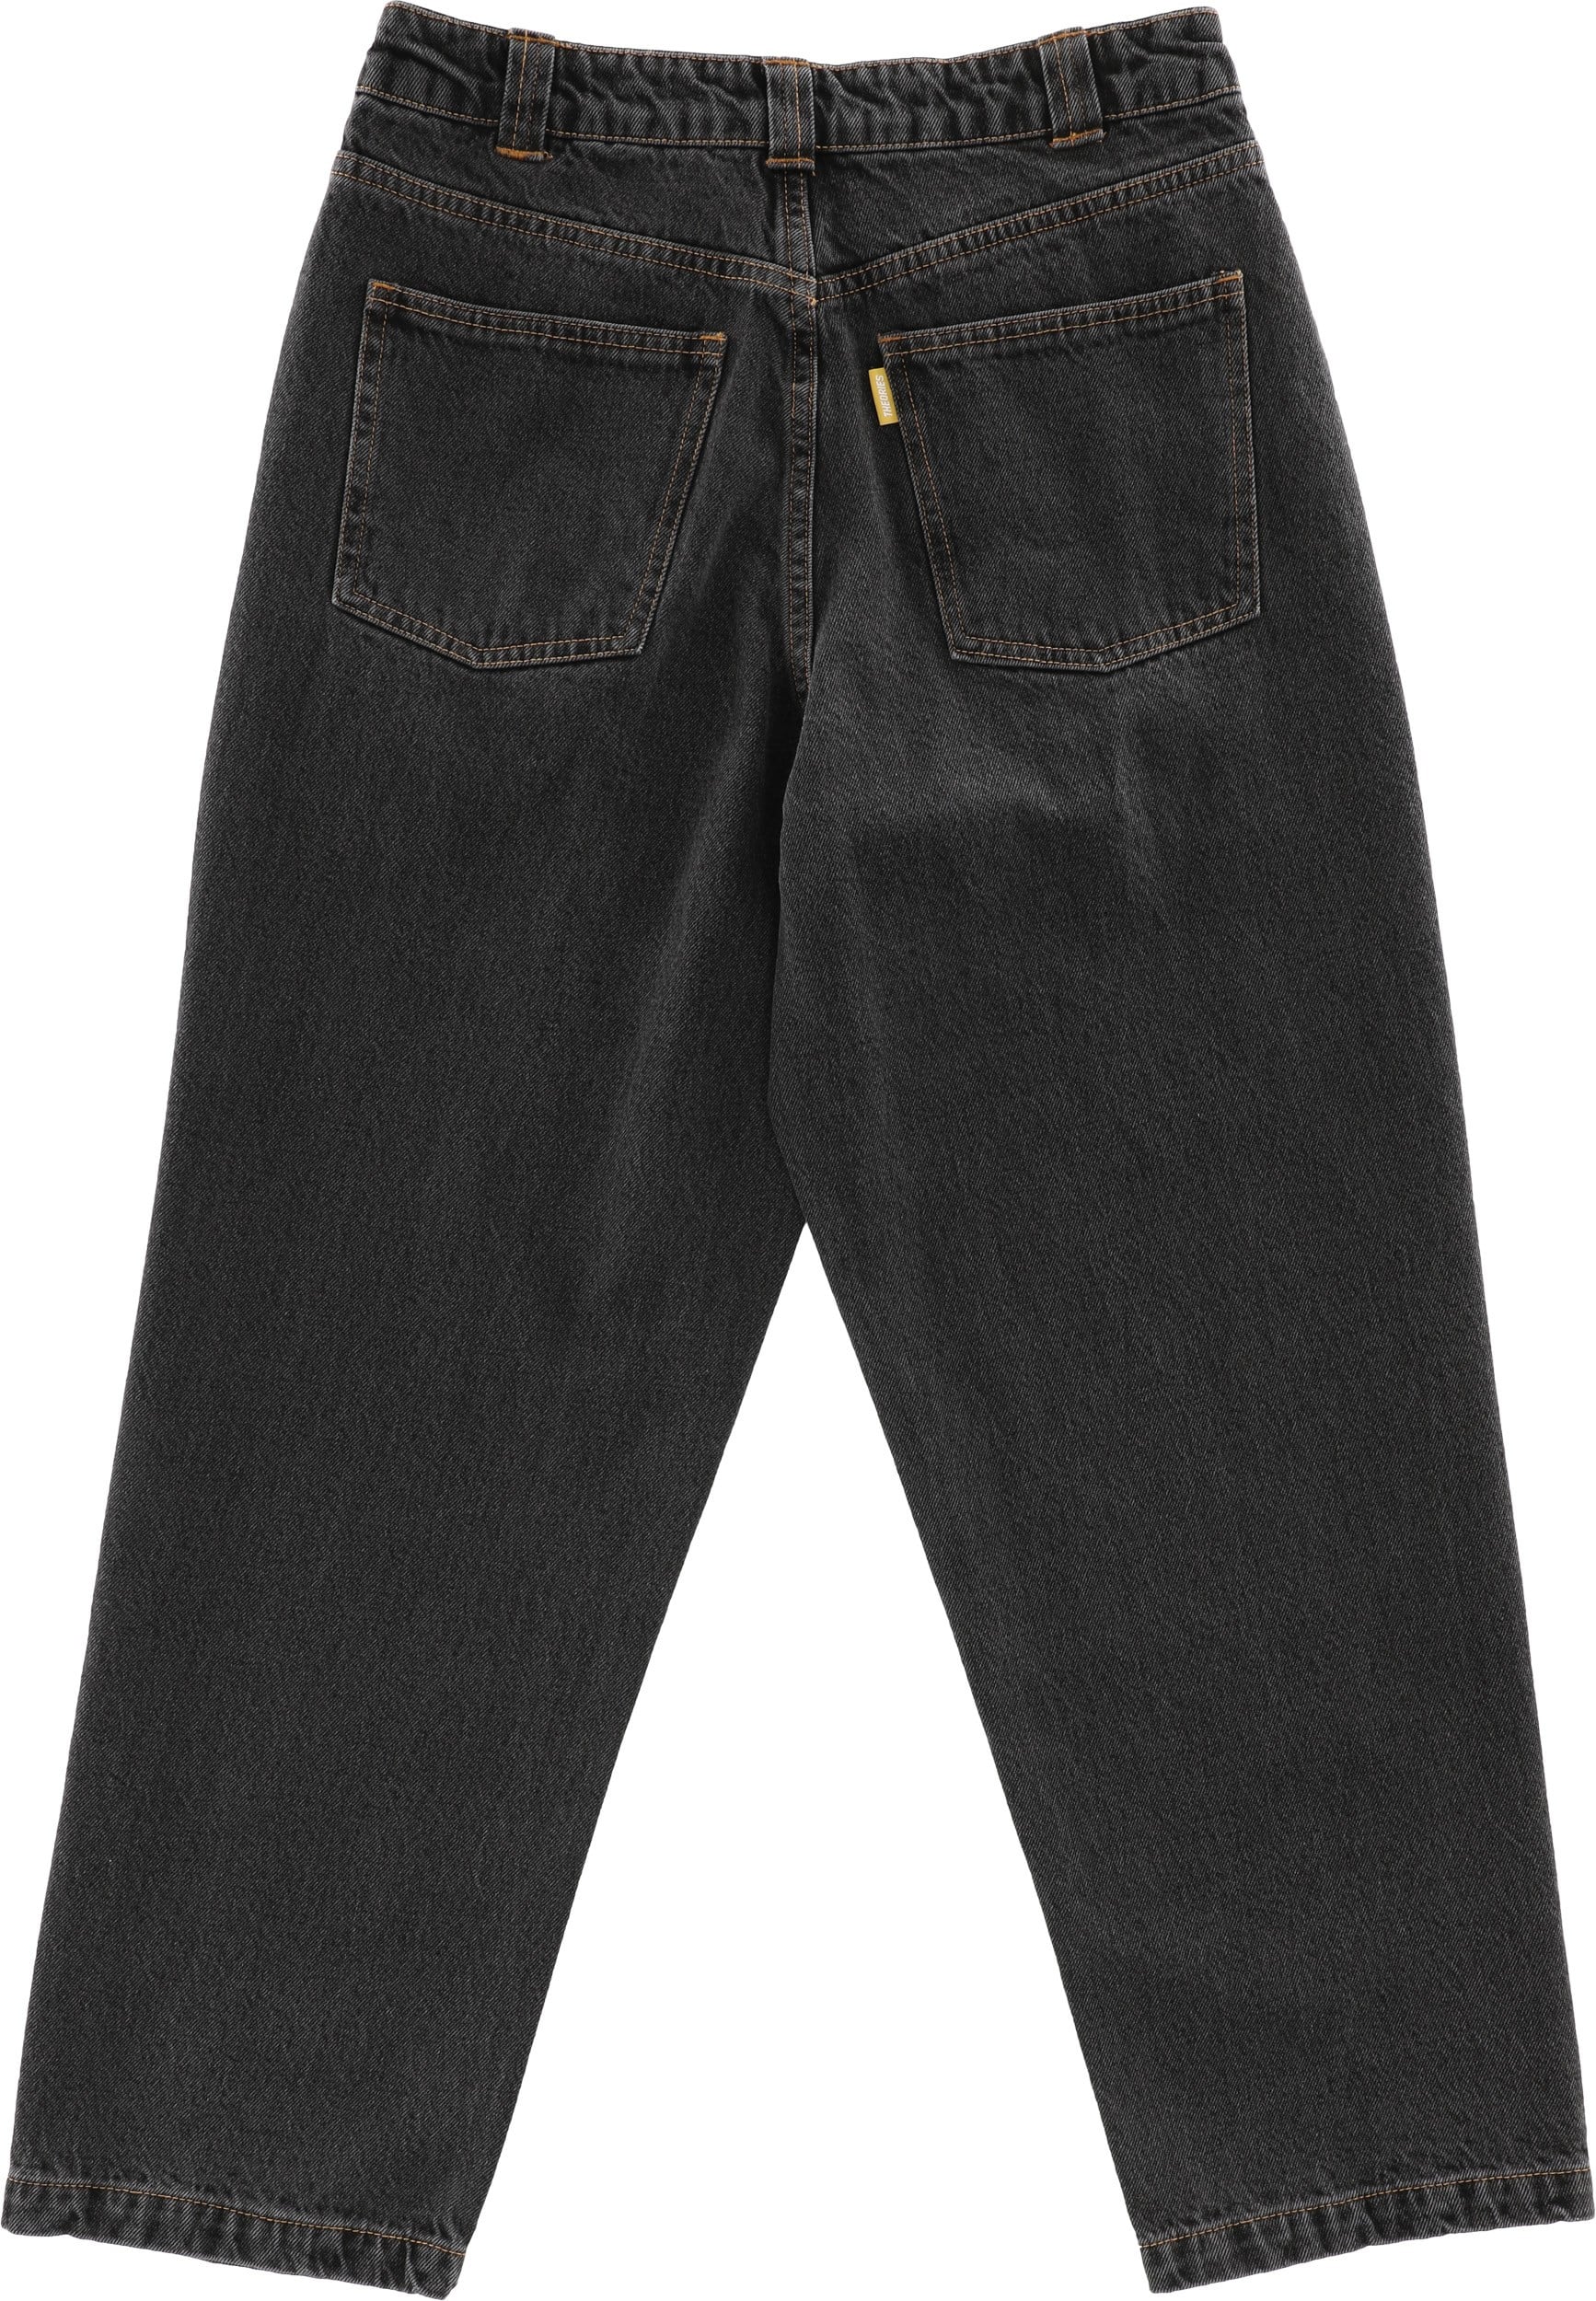 Theories Plaza Jeans - washed black - Free Shipping | Tactics